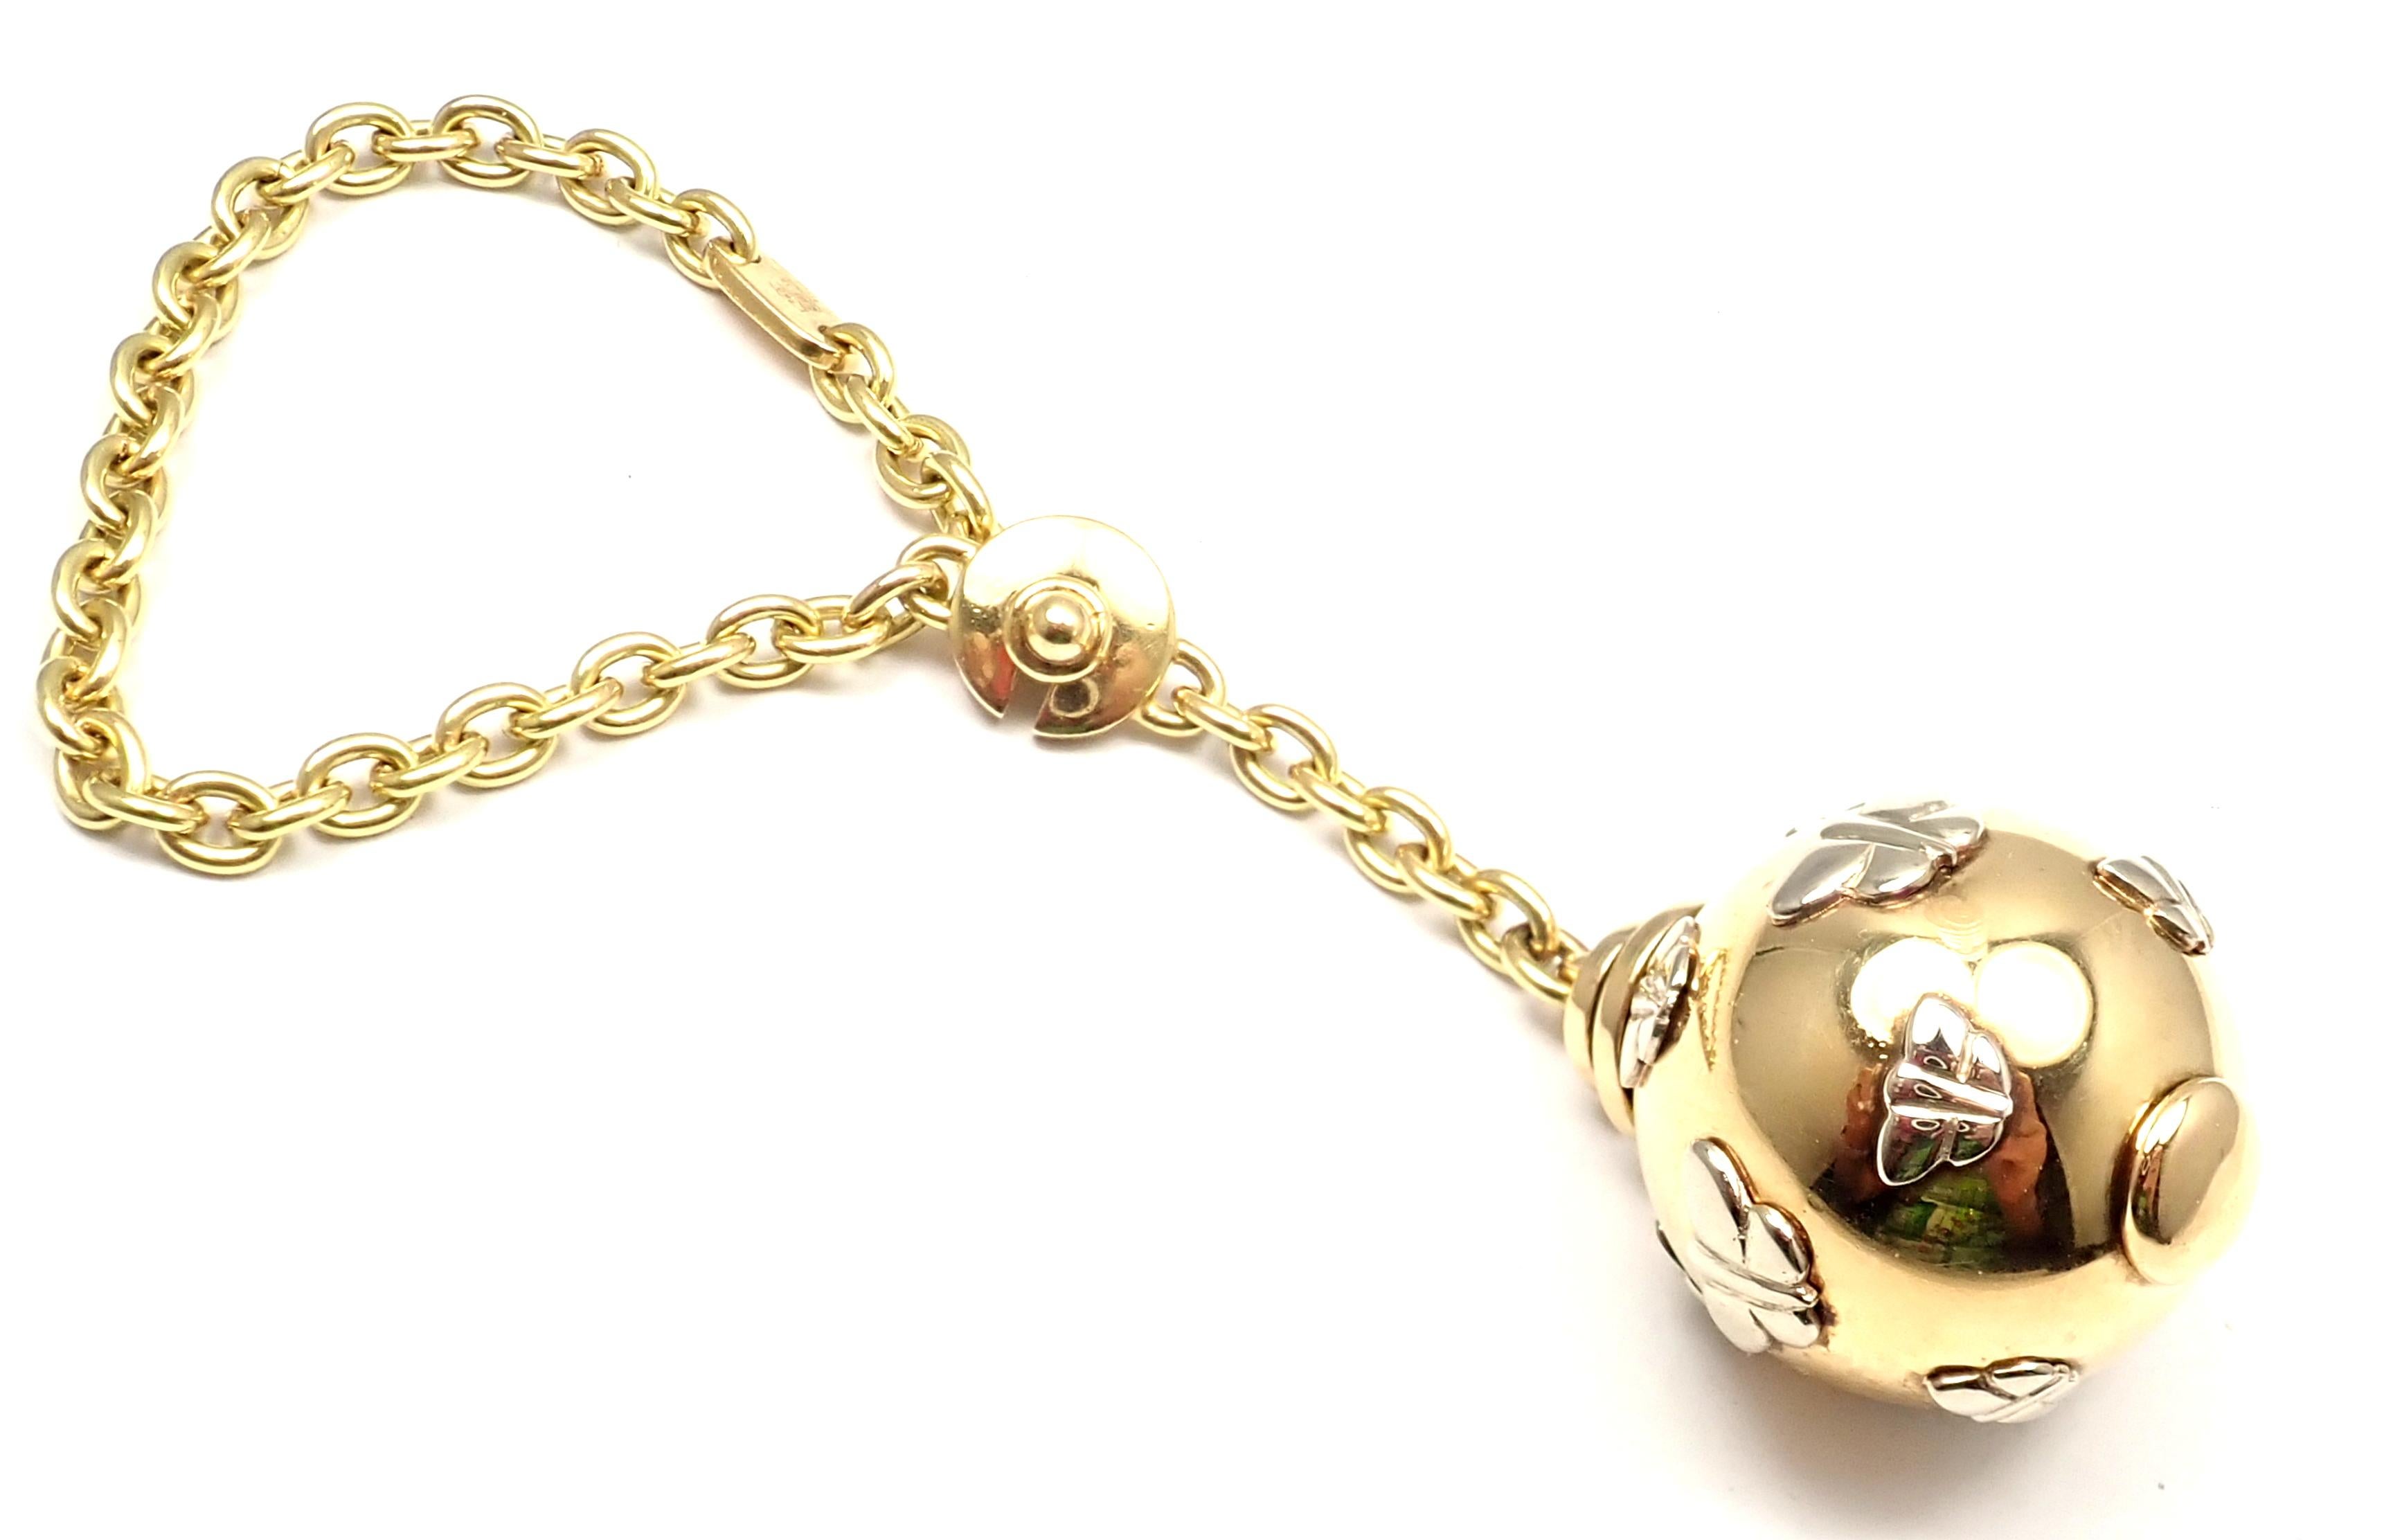 Bulgari Butterfly Globe Yellow and White Gold Keychain In Excellent Condition For Sale In Holland, PA